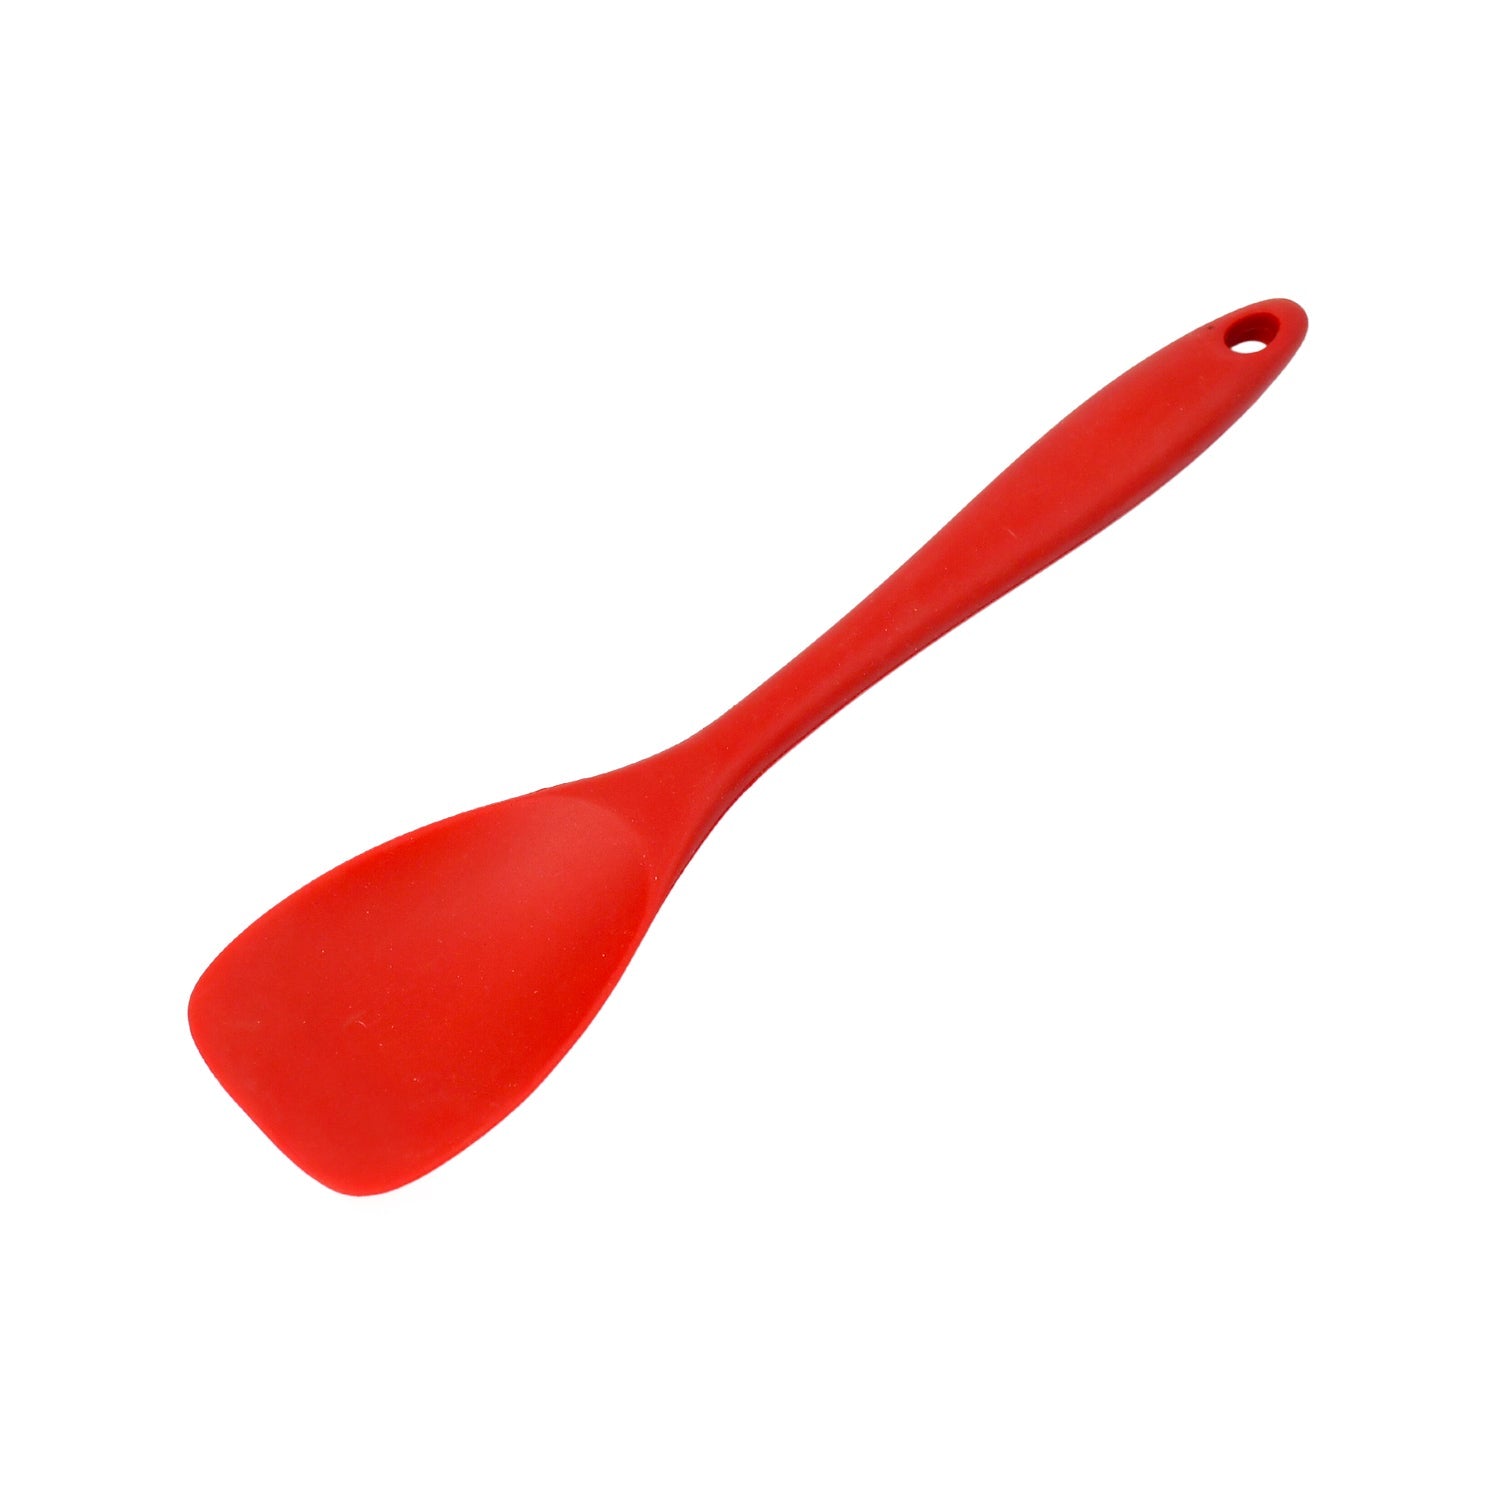 5374 HEAT RESISTANT SILICONE SPATULA NON-STICK WOK TURNER IN HYGIENIC SOLID COATING COOKWARE KITCHEN TOOLS JK Trends